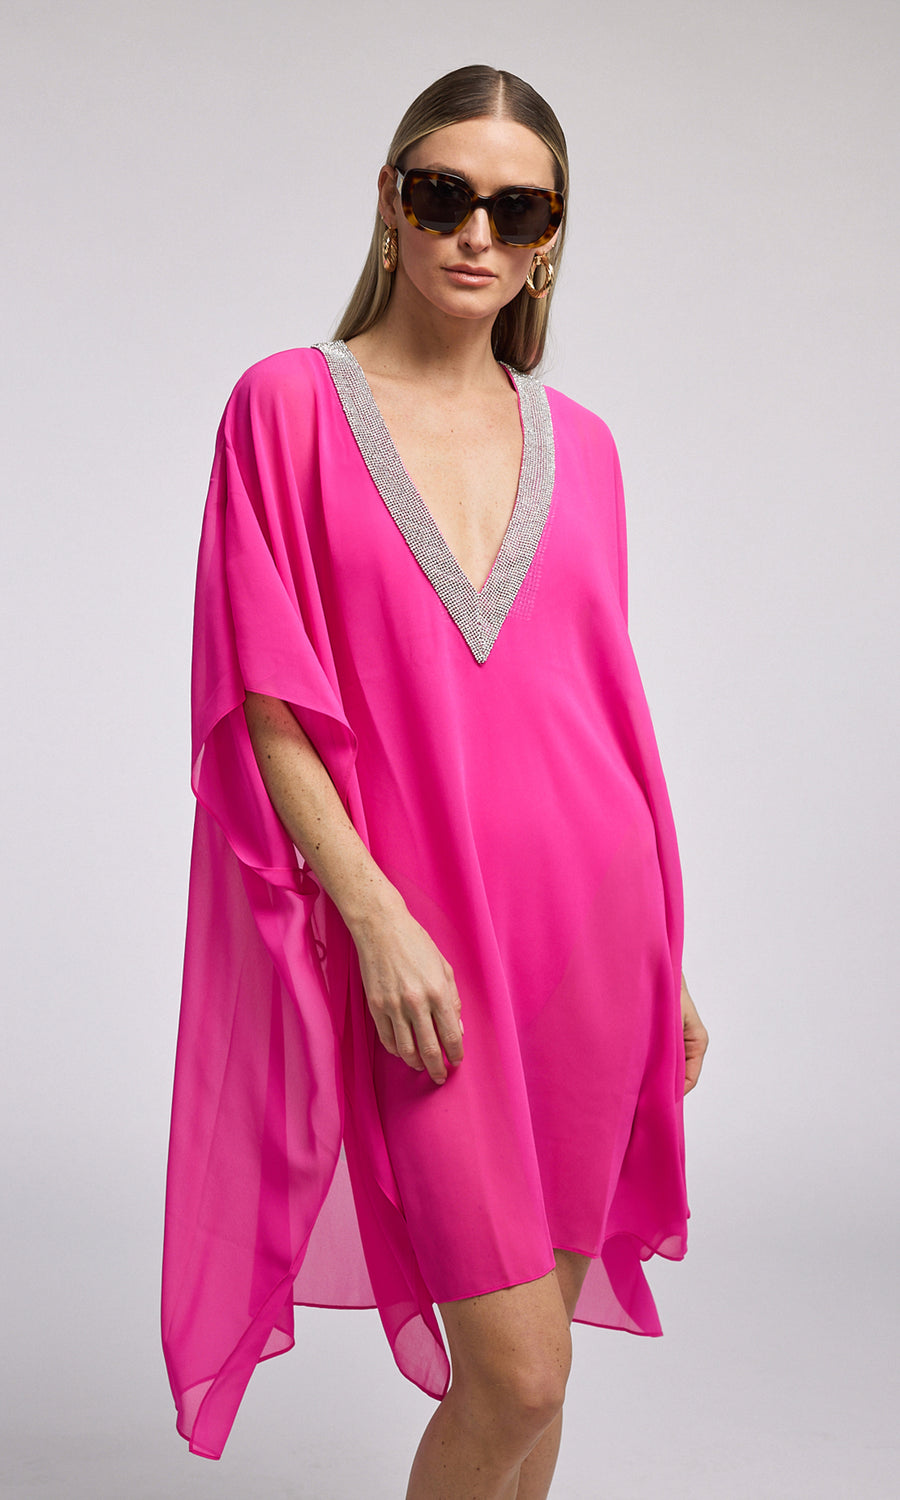 Bria Crystal Cover-Up - Hot Pink/Clear